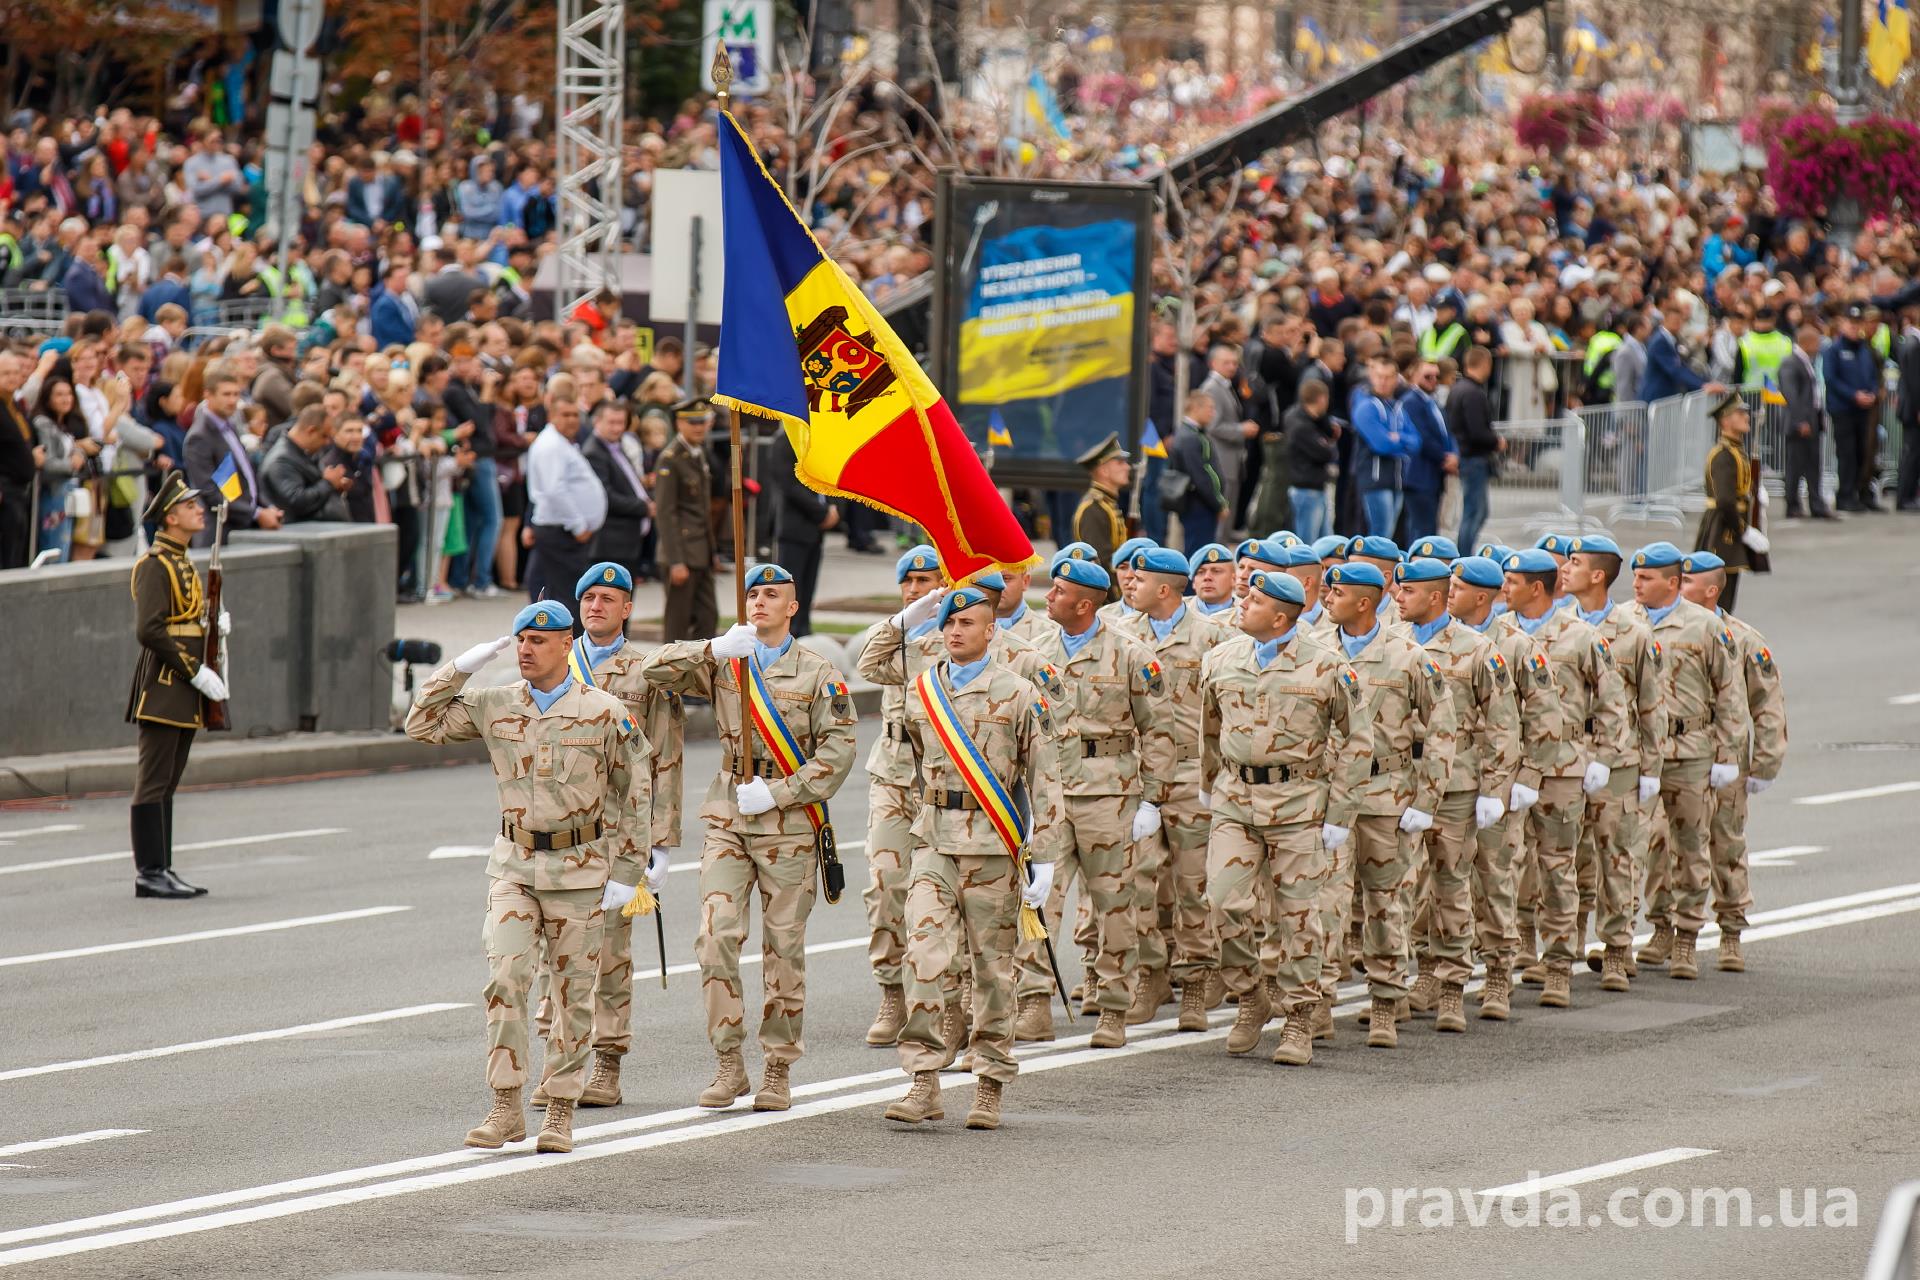 Divisions from eight NATO countries attend military parade on Ukraine’s Independence Day ~~